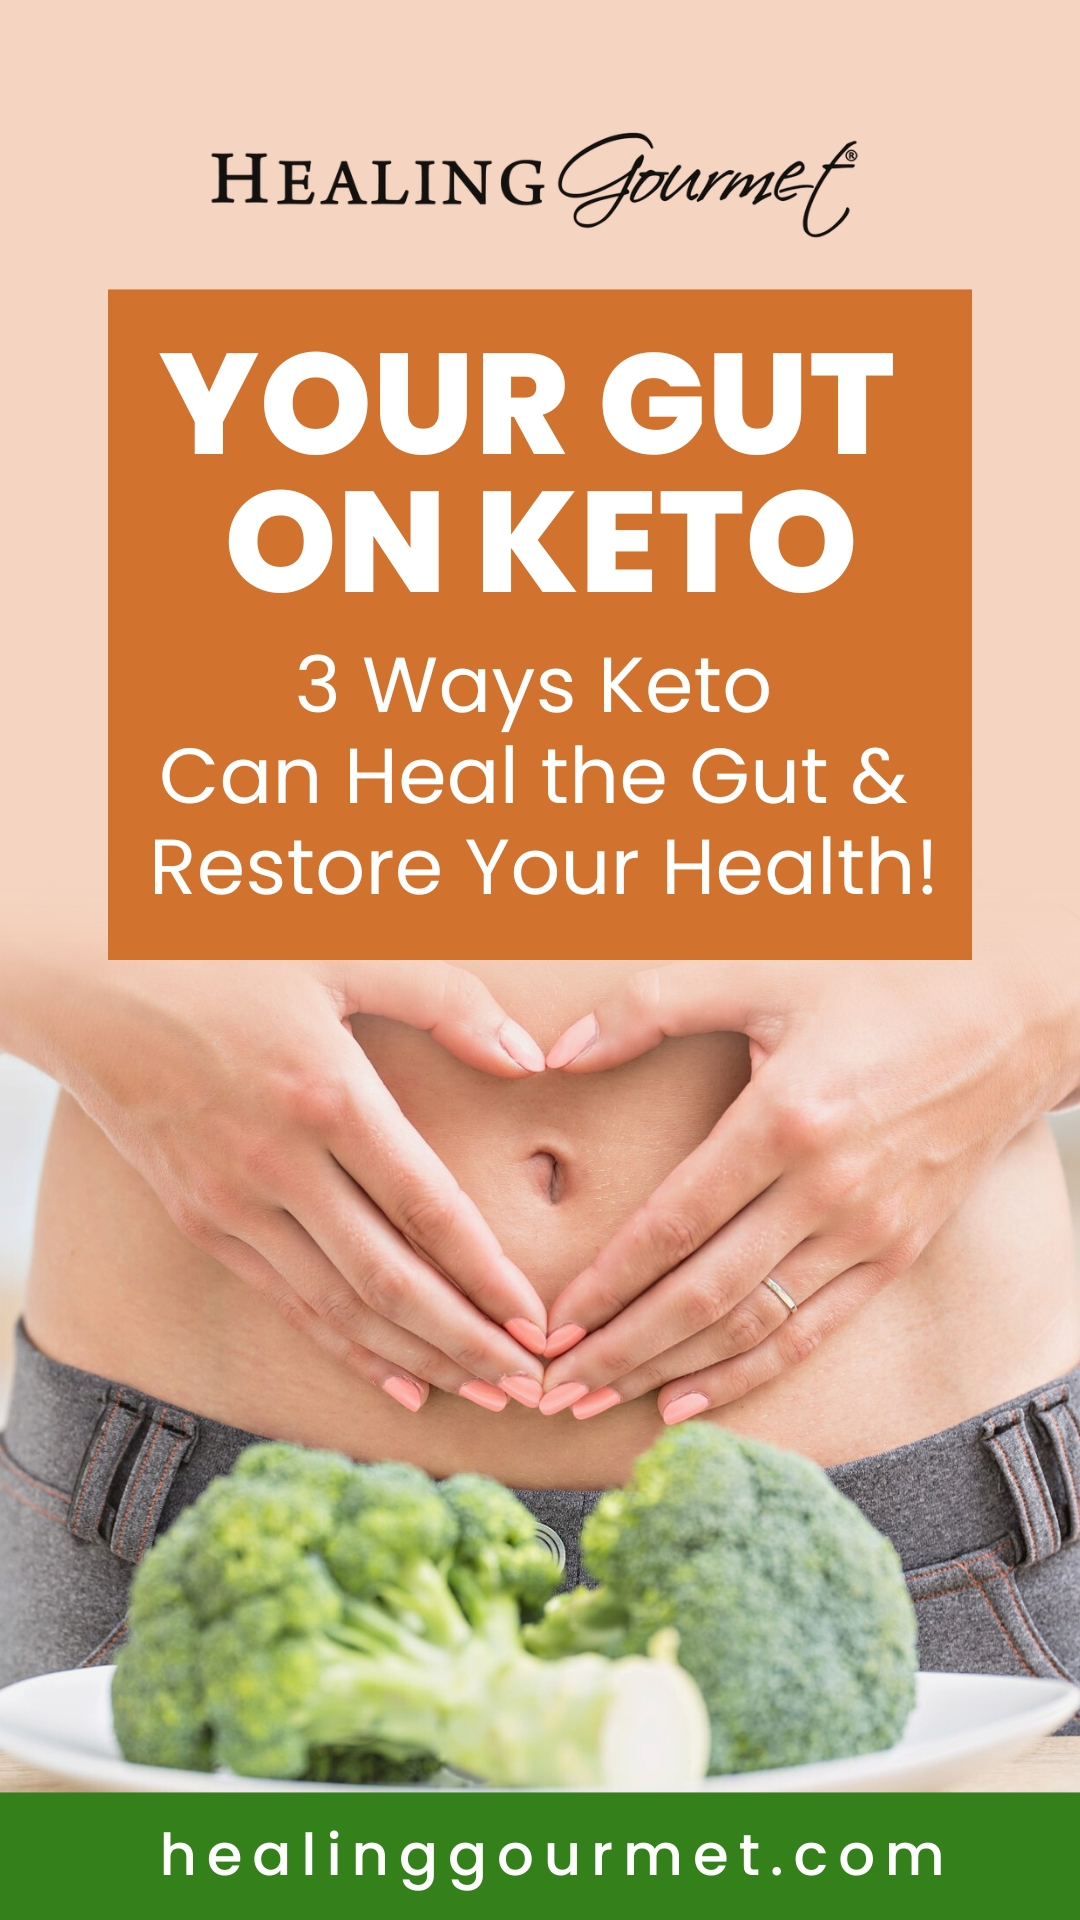 Can You Heal Your Gut with the Keto Diet?